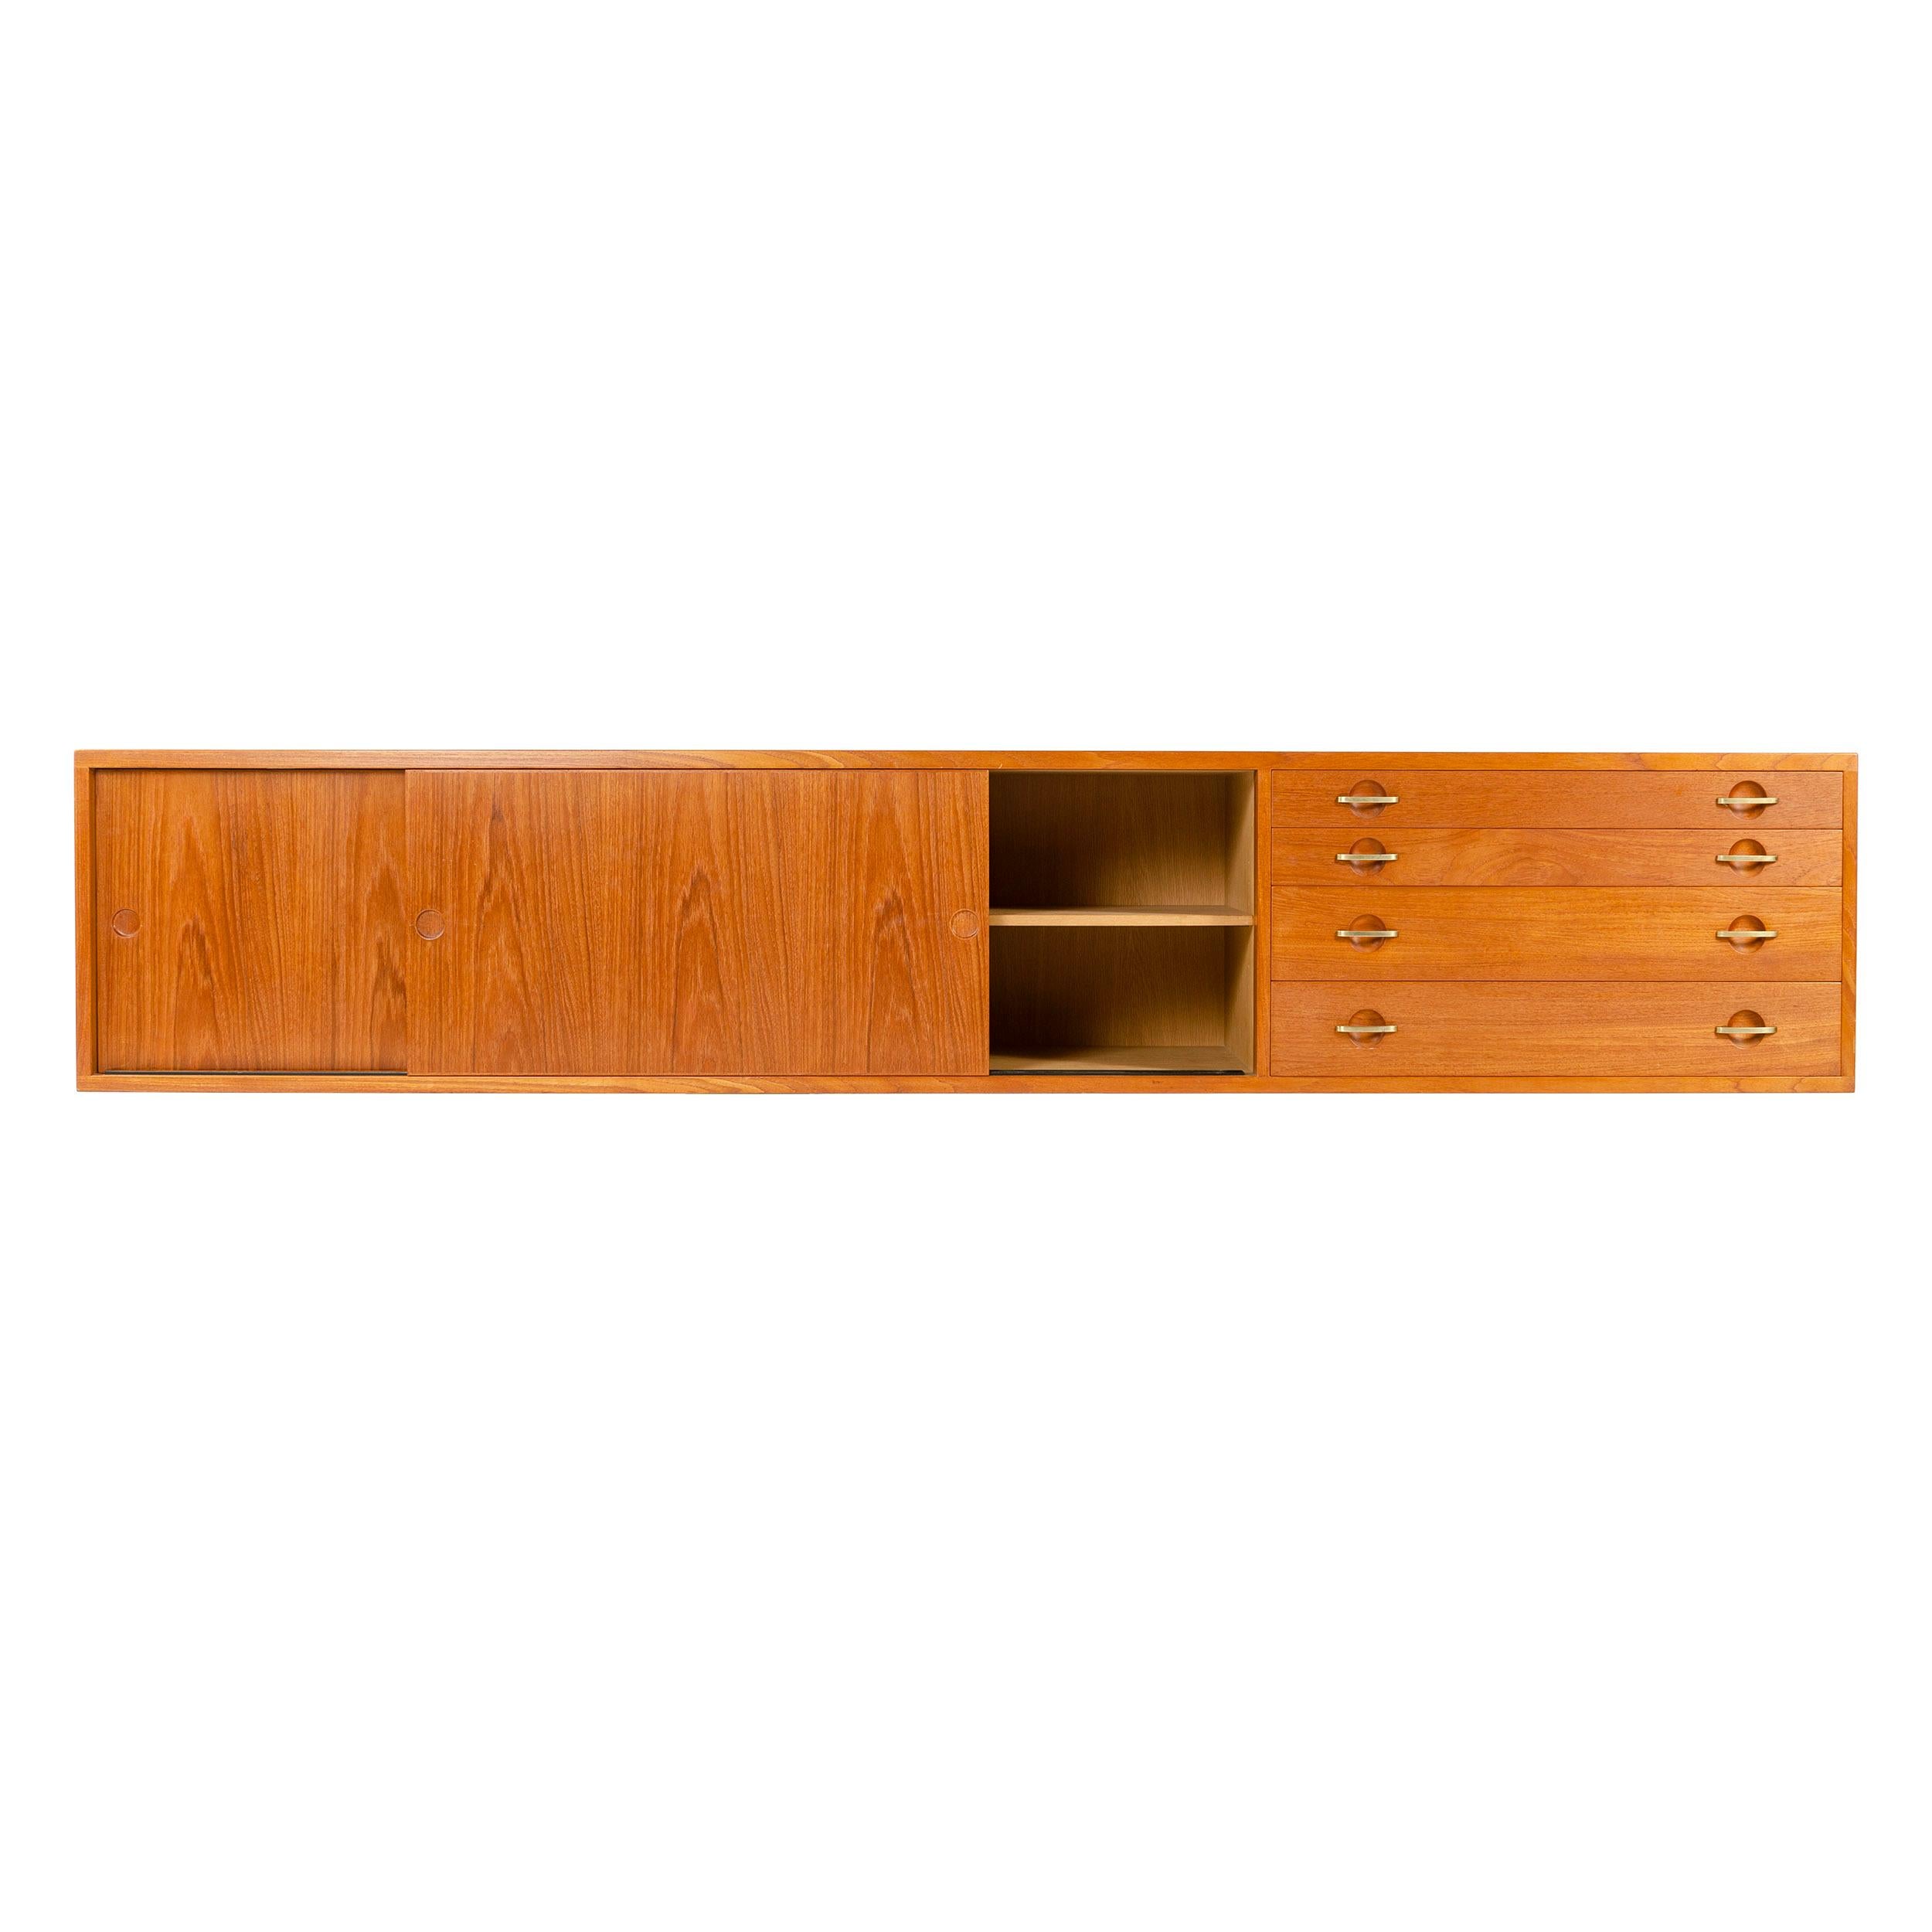 A teak wall mount credenza / cabinet with two sliding doors and four drawers. Designed by Hans Wegner, made by Johannes Hansen, Denmark, 1952.